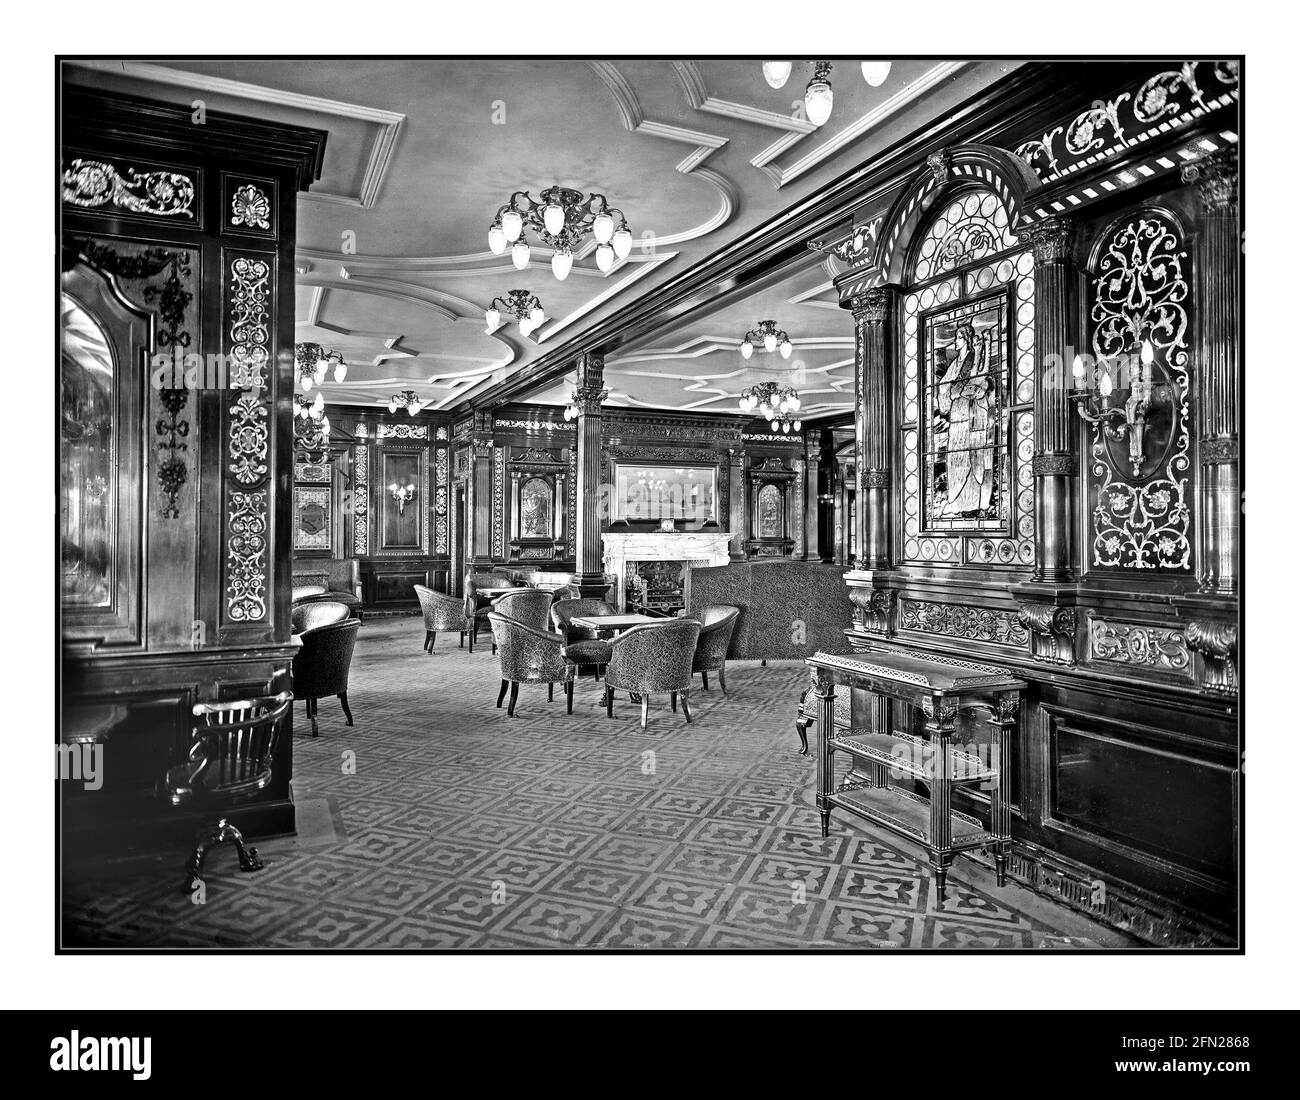 OLYMPIC 1912 The RMS Olympic 's smoke room, similar to Titanic 's. A first rate interior 1912's picture taken from the starboard side of the first class smoke room, reserved for gentlemen only. This room was also the place where Harland & Wolff director Thomas Andrews was last seen as the Titanic sank.1912 Robert John Welch (1859-1936), official photographer for Harland & Wolff Titanic  1909 luxurious first class interior Smoke Room RMS Titanic promotional brochure advertising B&W photograph image Stock Photo